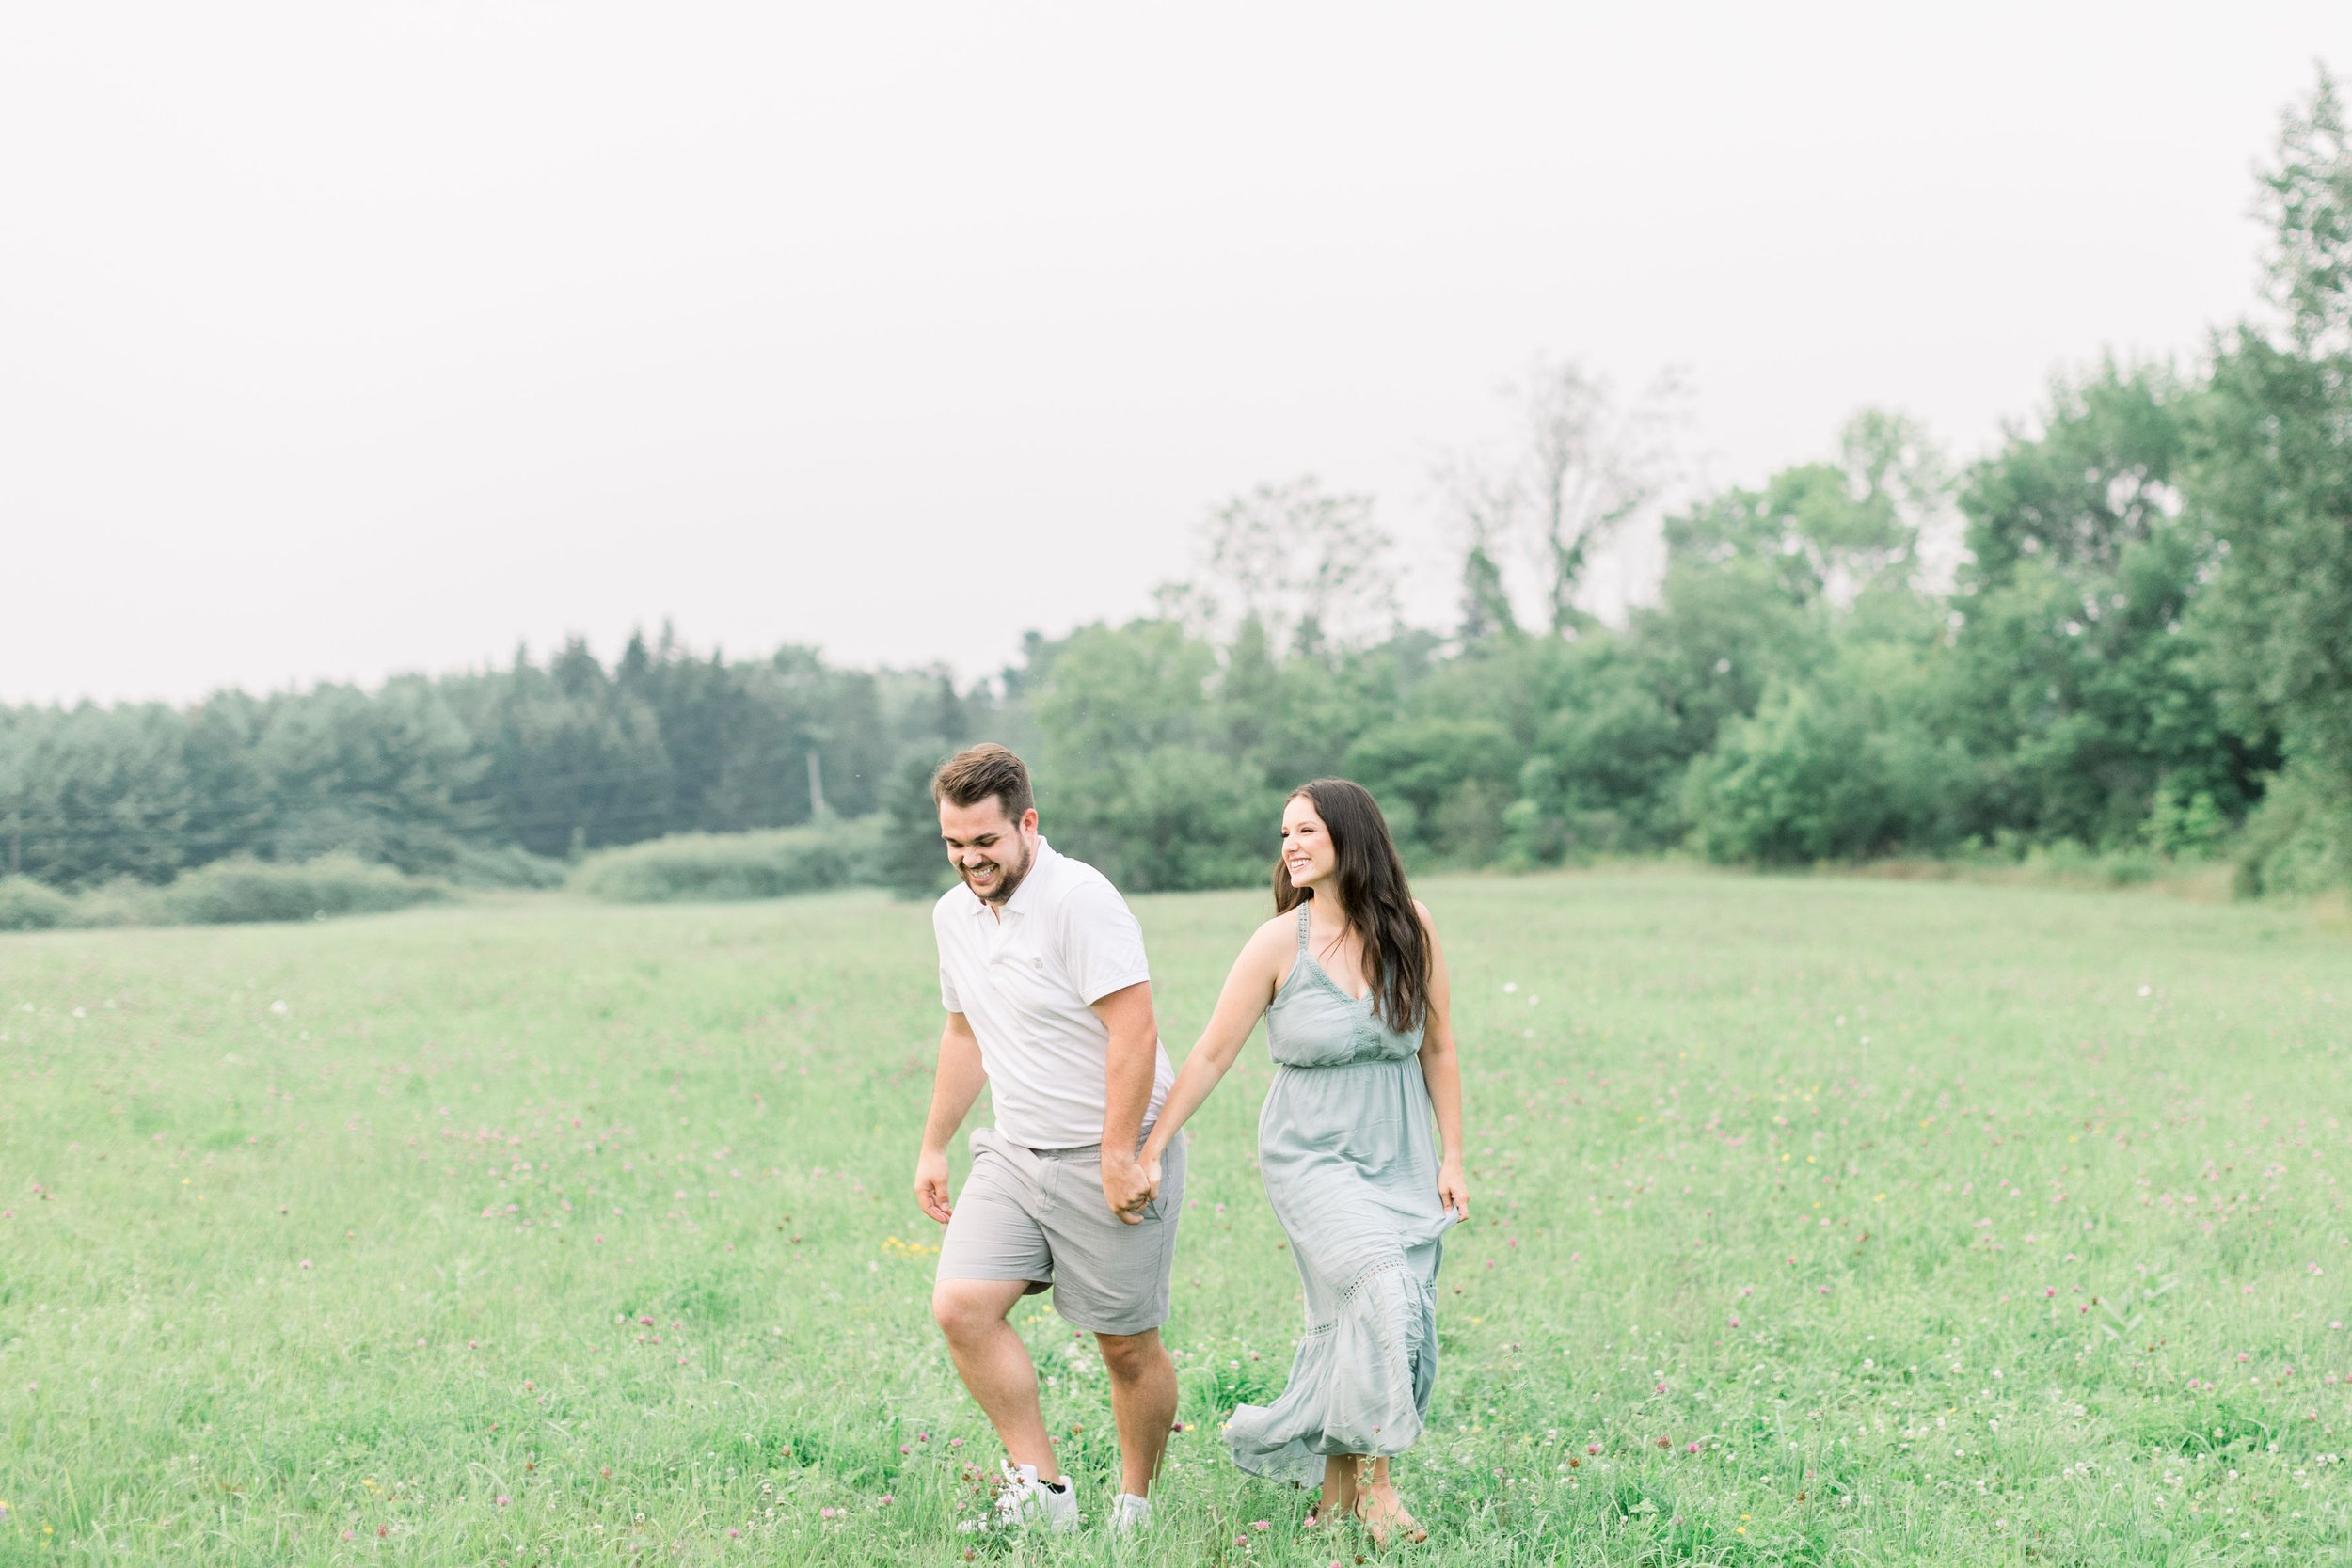  At Grass Creek Park an engaged couple runs through a field by Chelsea Mason Photography. frolic through field #Kingstonengagementlocations #GrassCreekParkPortraits #Ontarioengagementphotographers #Chelseamasonphotography #Chelseamasonengagements 